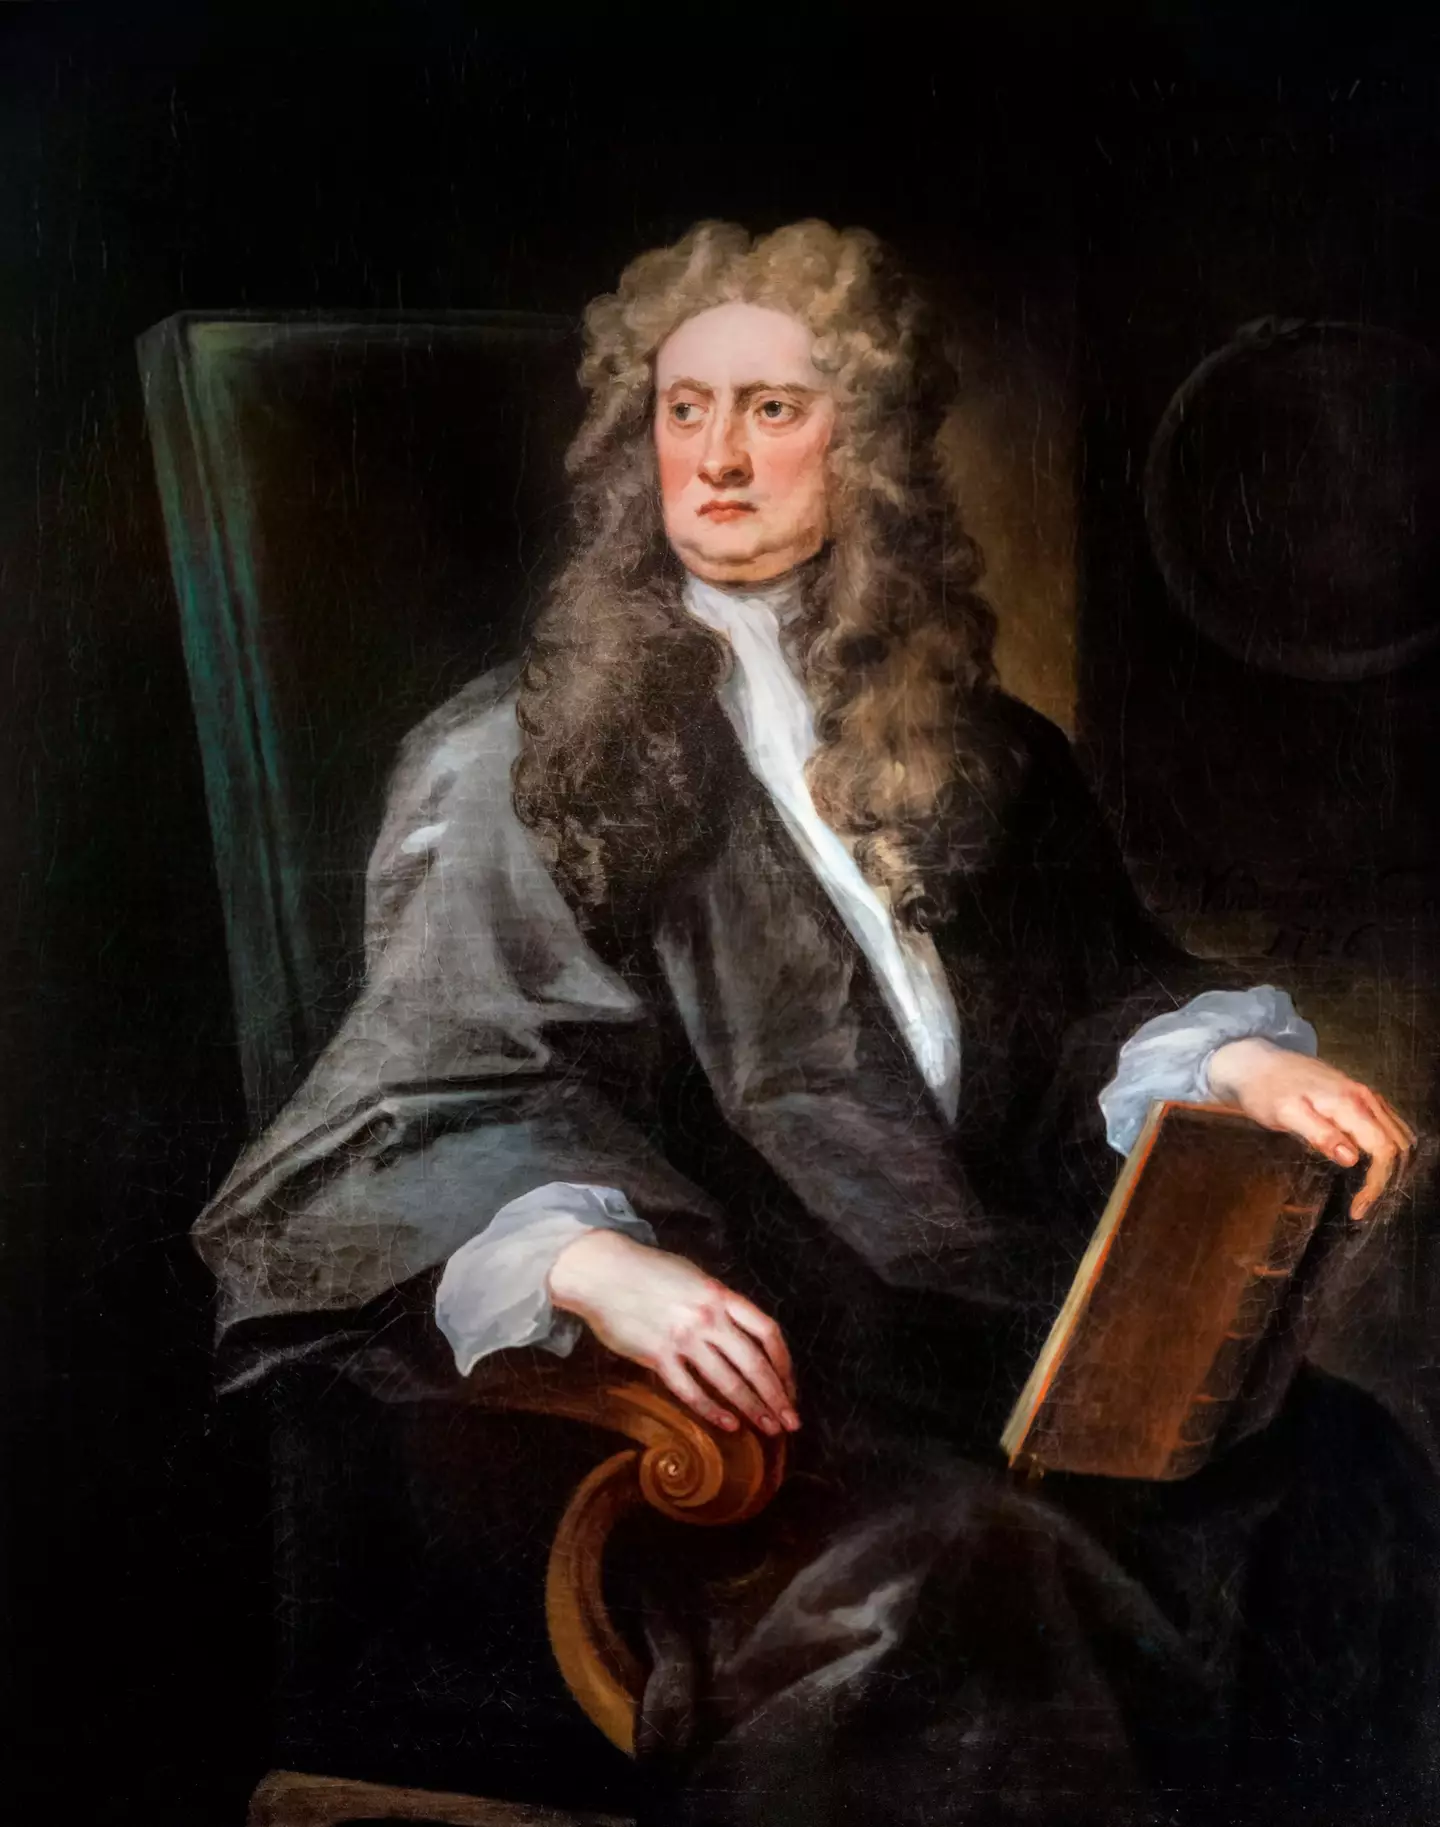 Sir Isaac Newton believed the world would end in 2060.